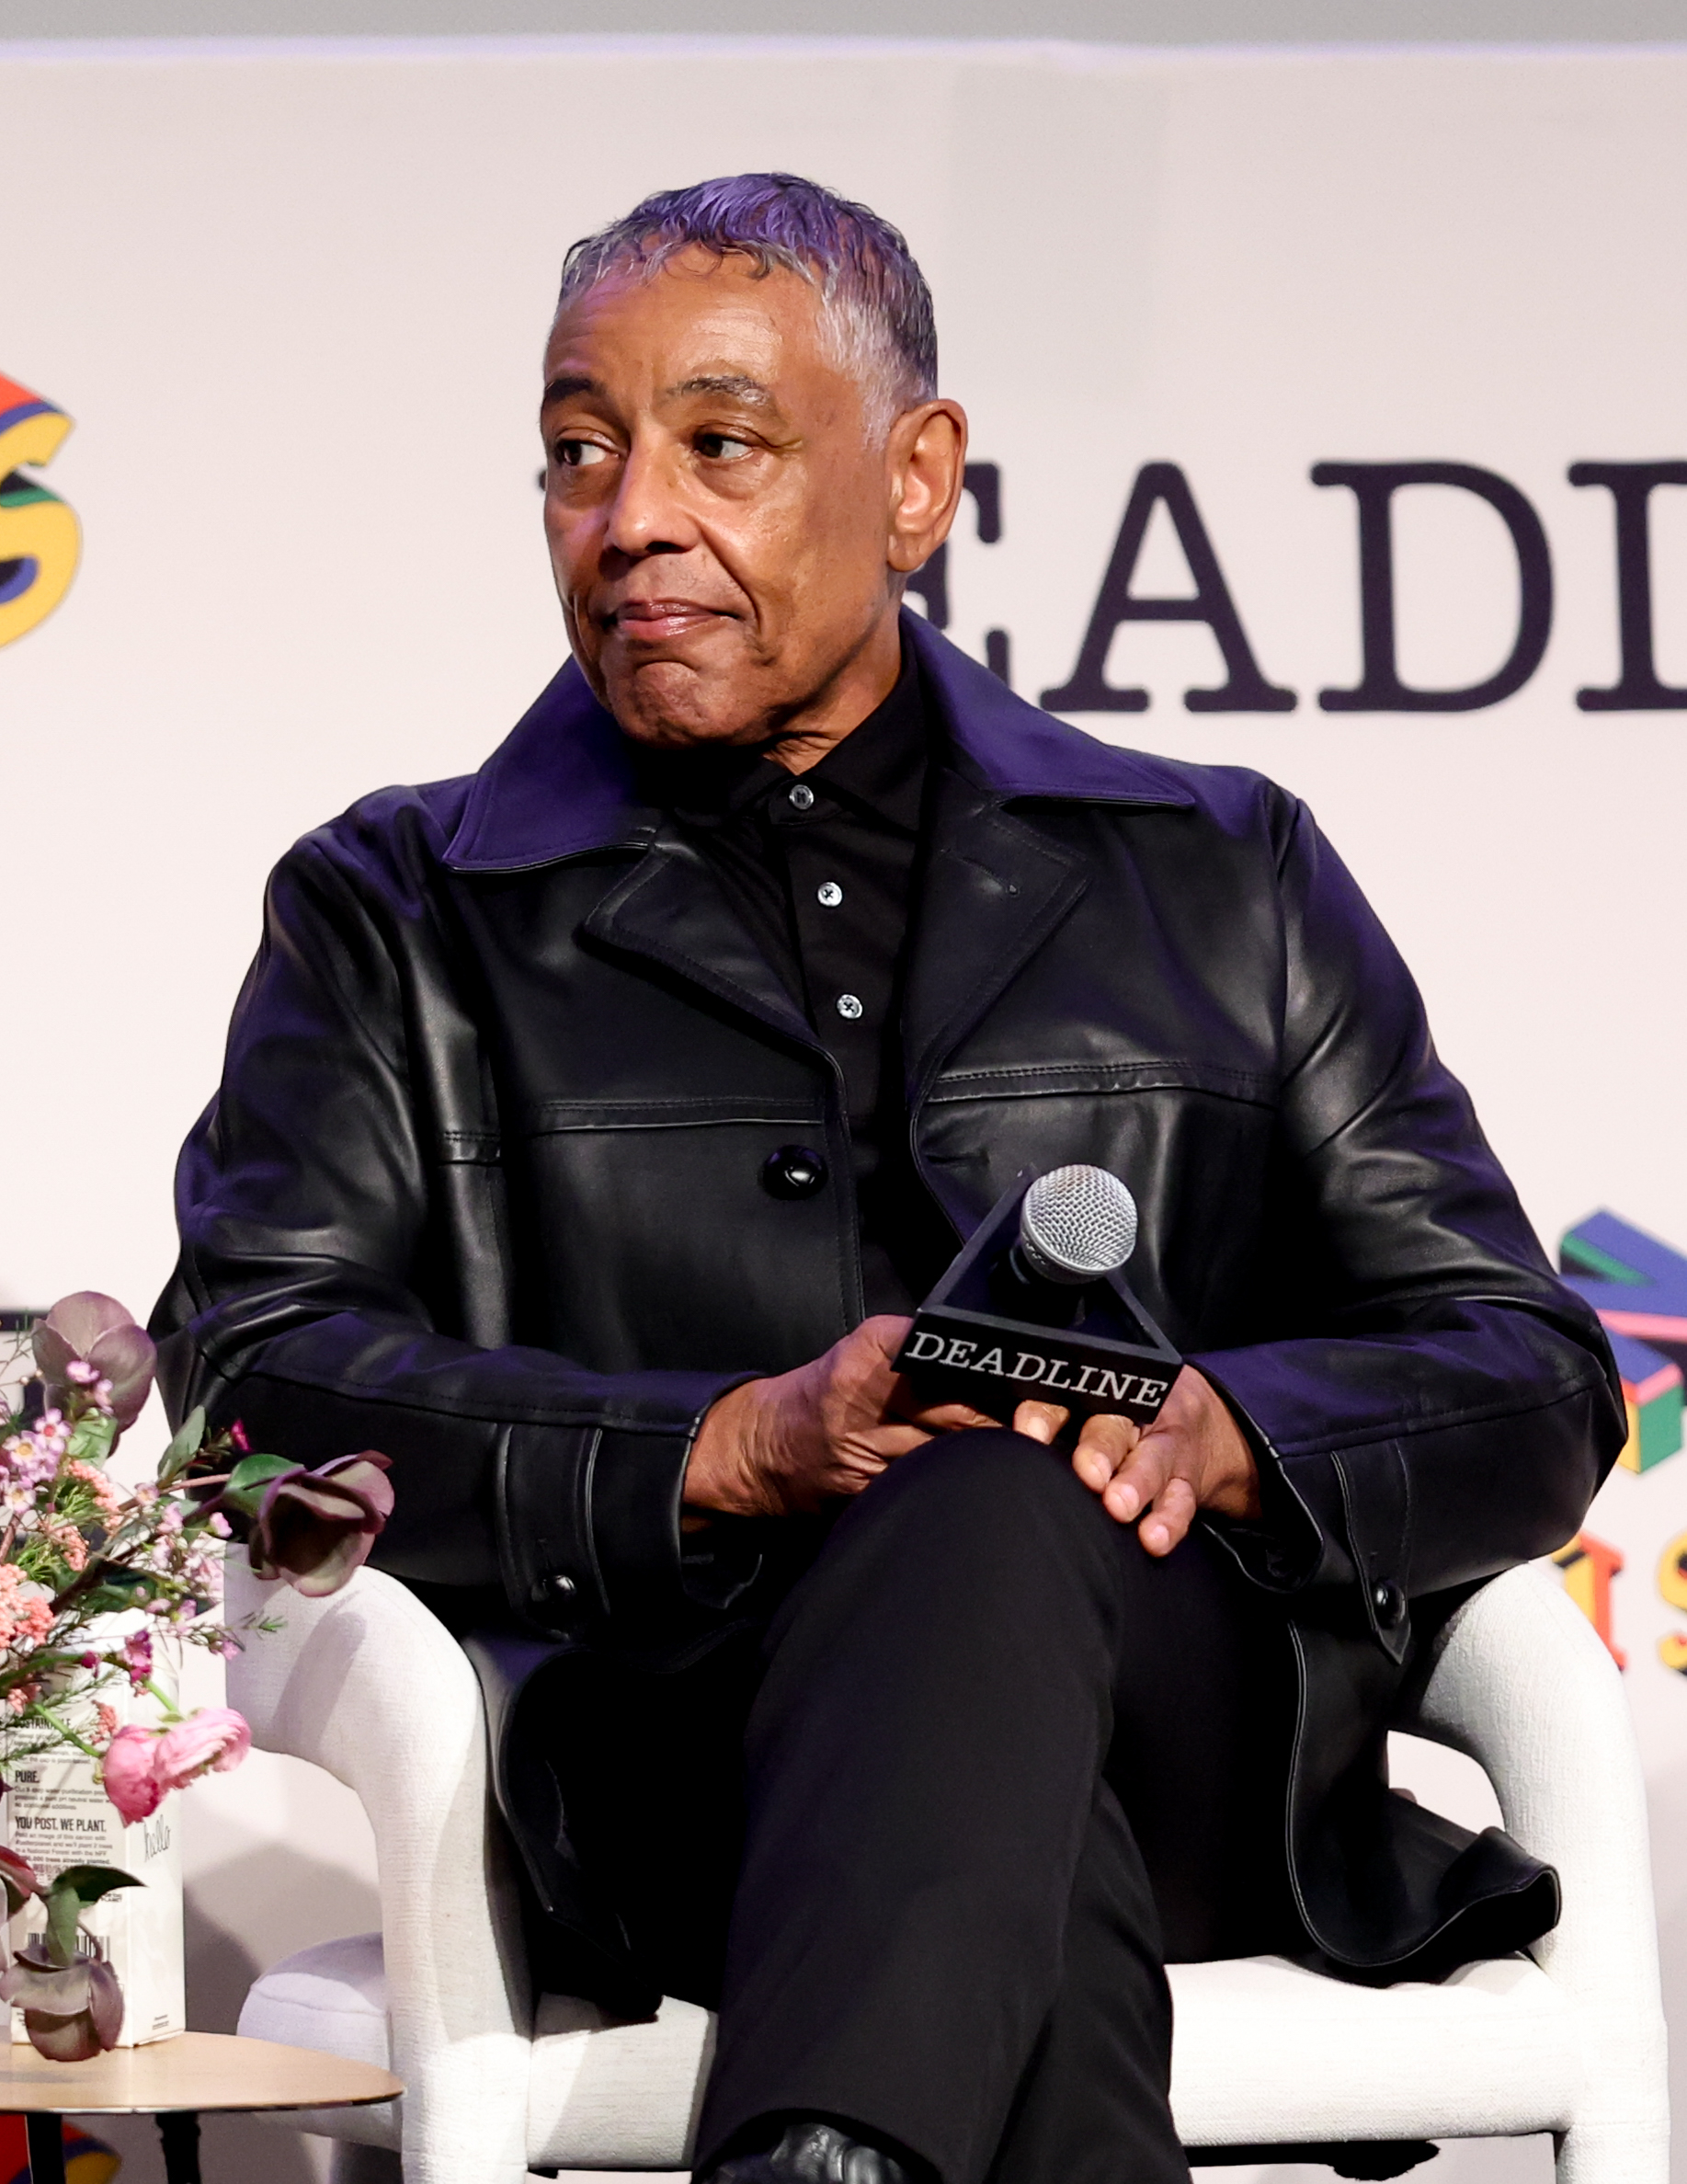 Giancarlo Esposito sitting engaged in a discussion at an event